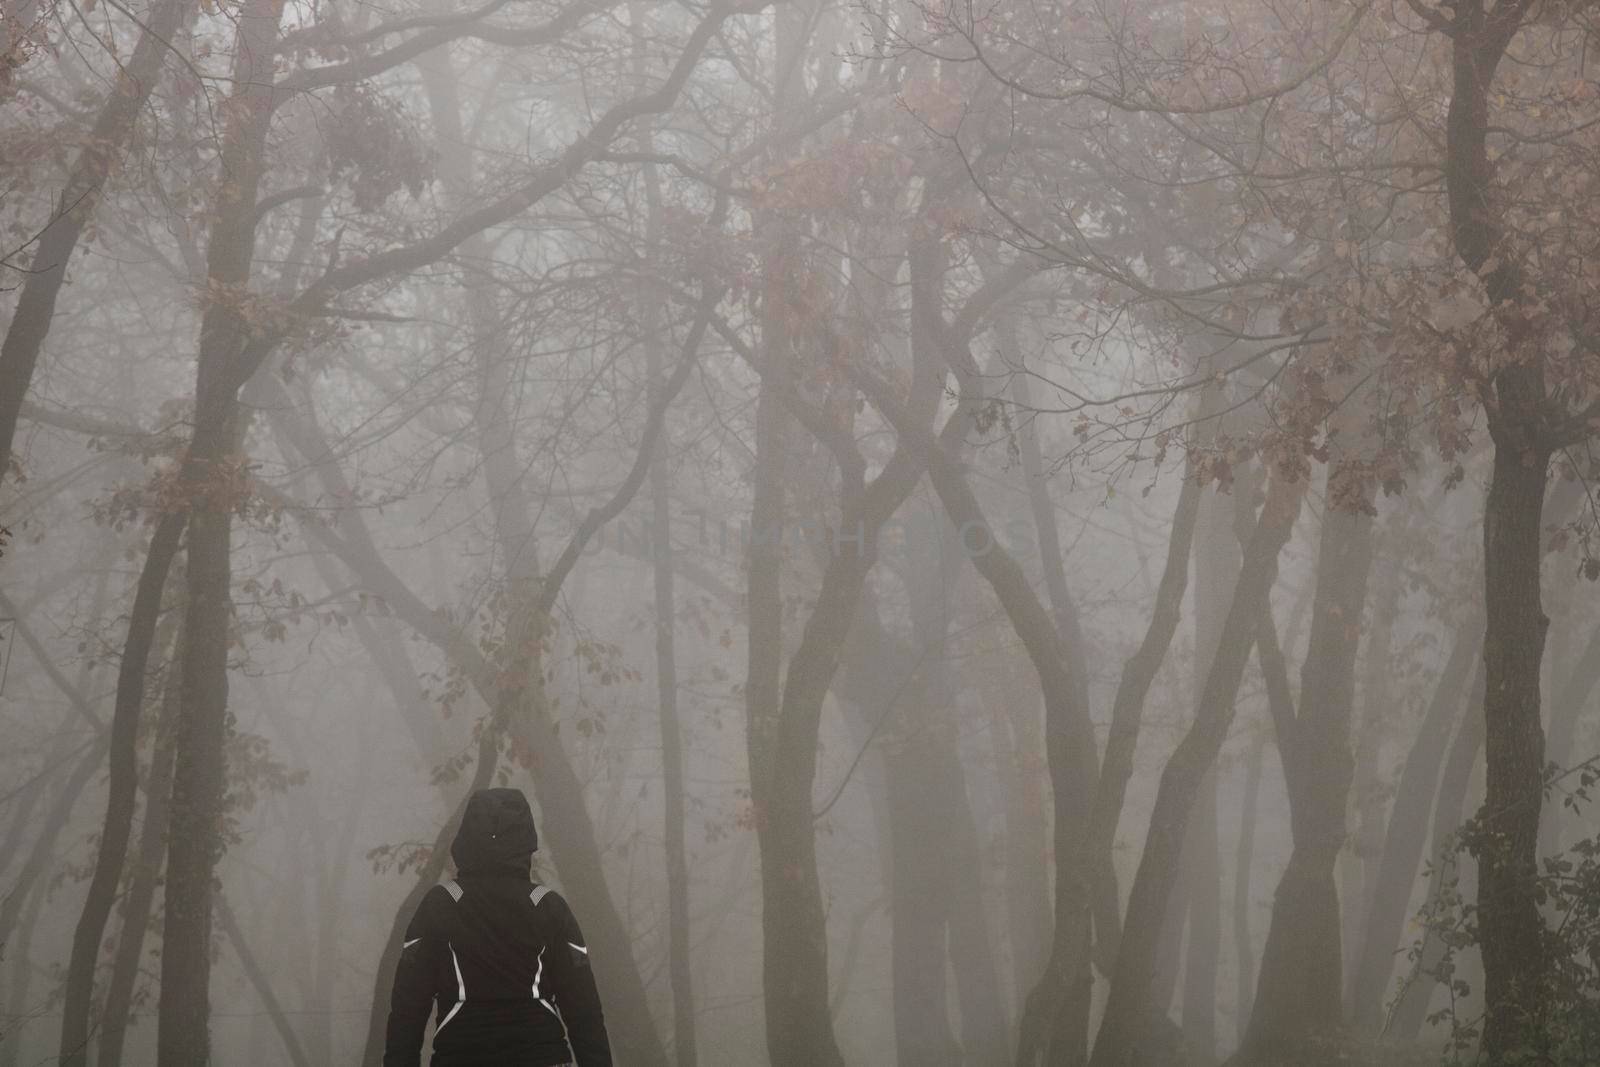 Girl walking among the fog and trees in a dark forest